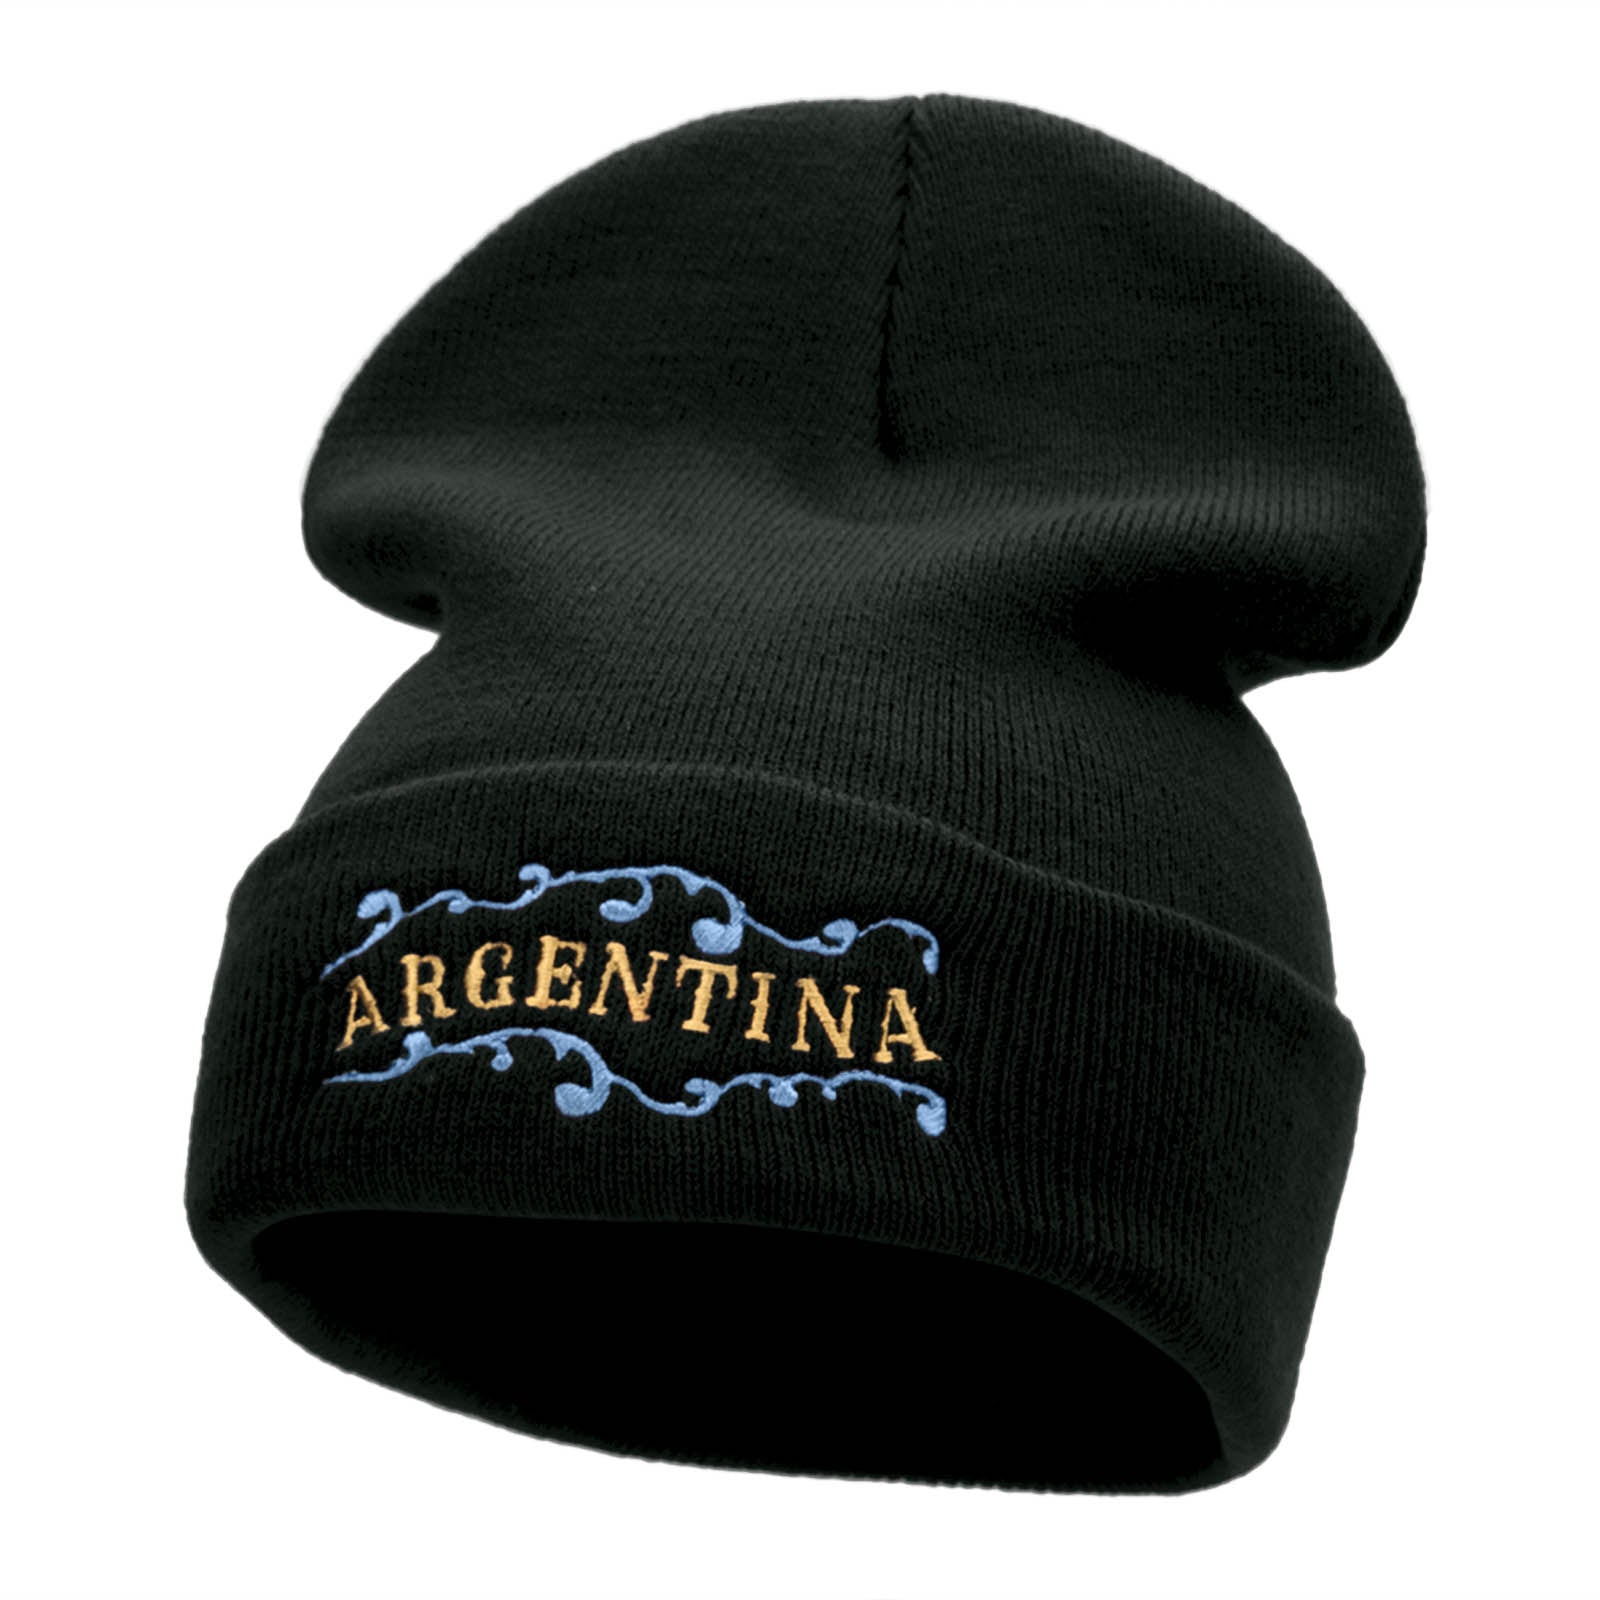 Argentina Embellishment Embroidered 12 Inch Long Knitted Beanie - Black OSFM